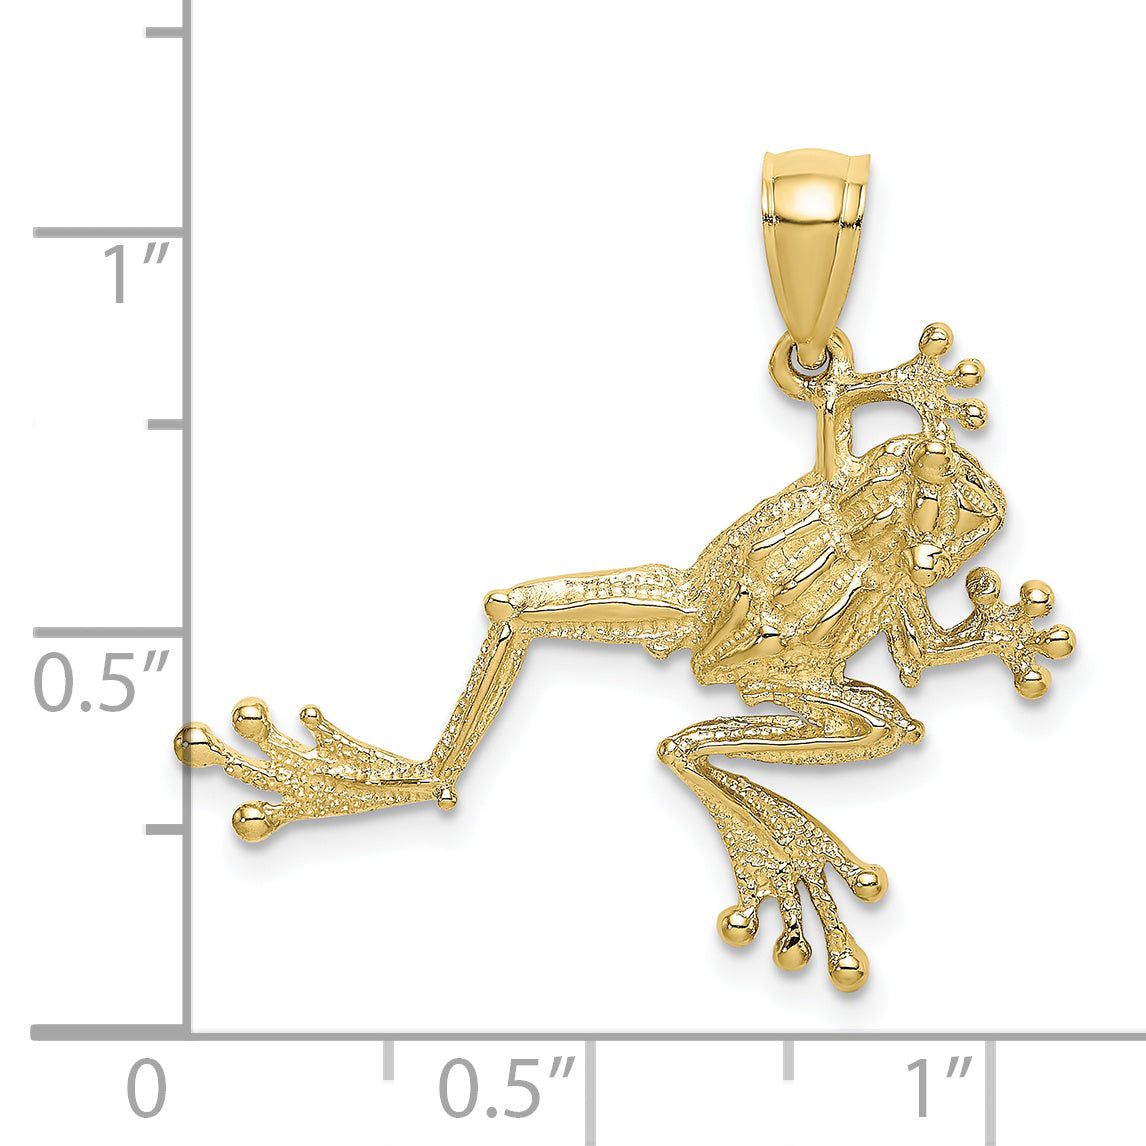 10K 2-D Textured Frog Charm